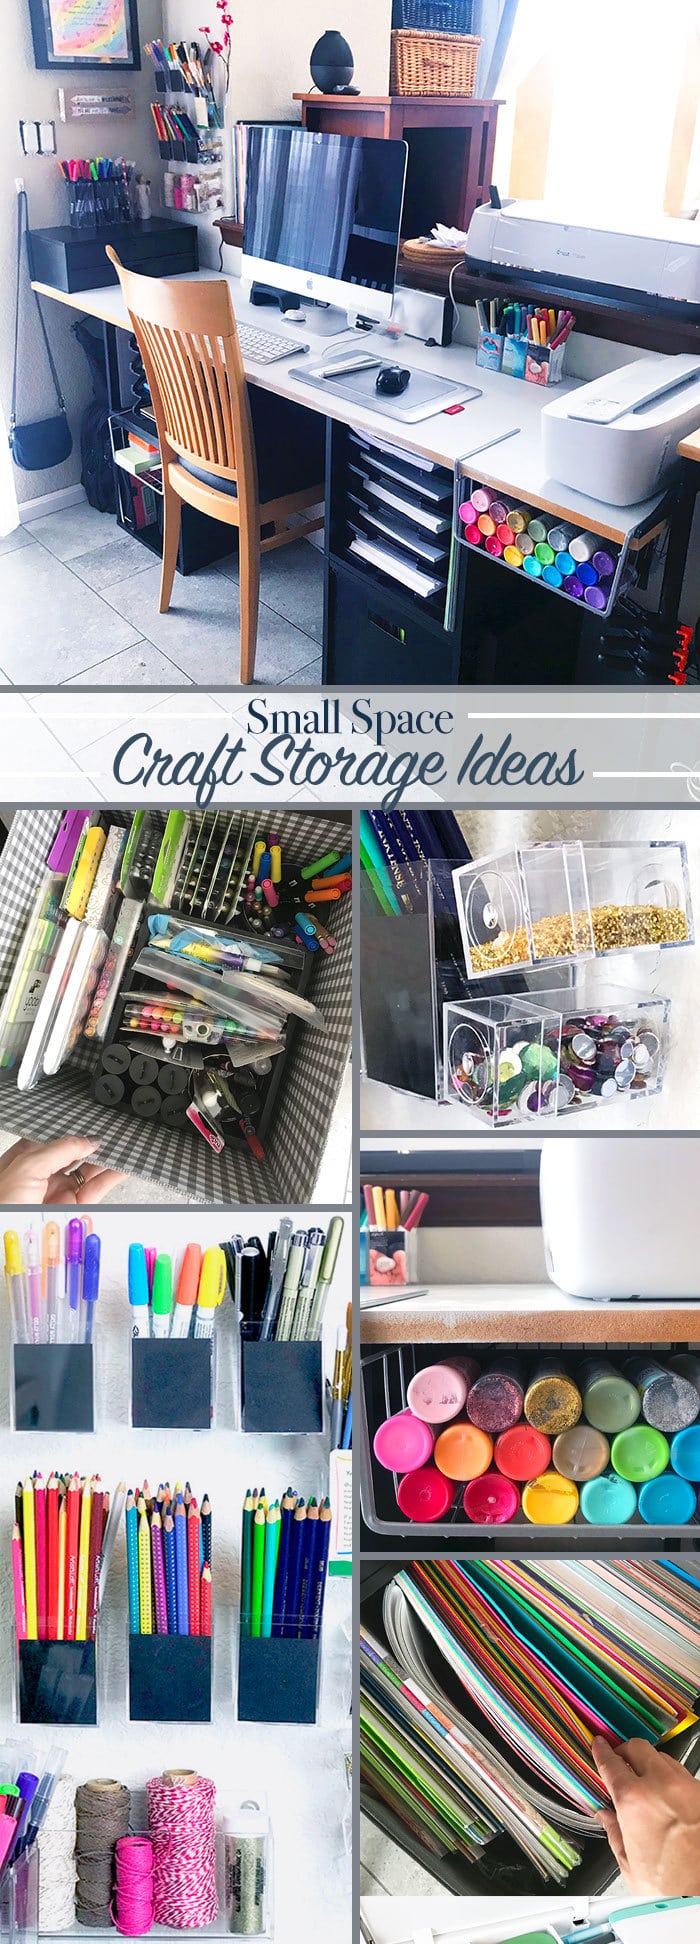 Ideas for Organizing Kids' Craft Supplies in a Small Space